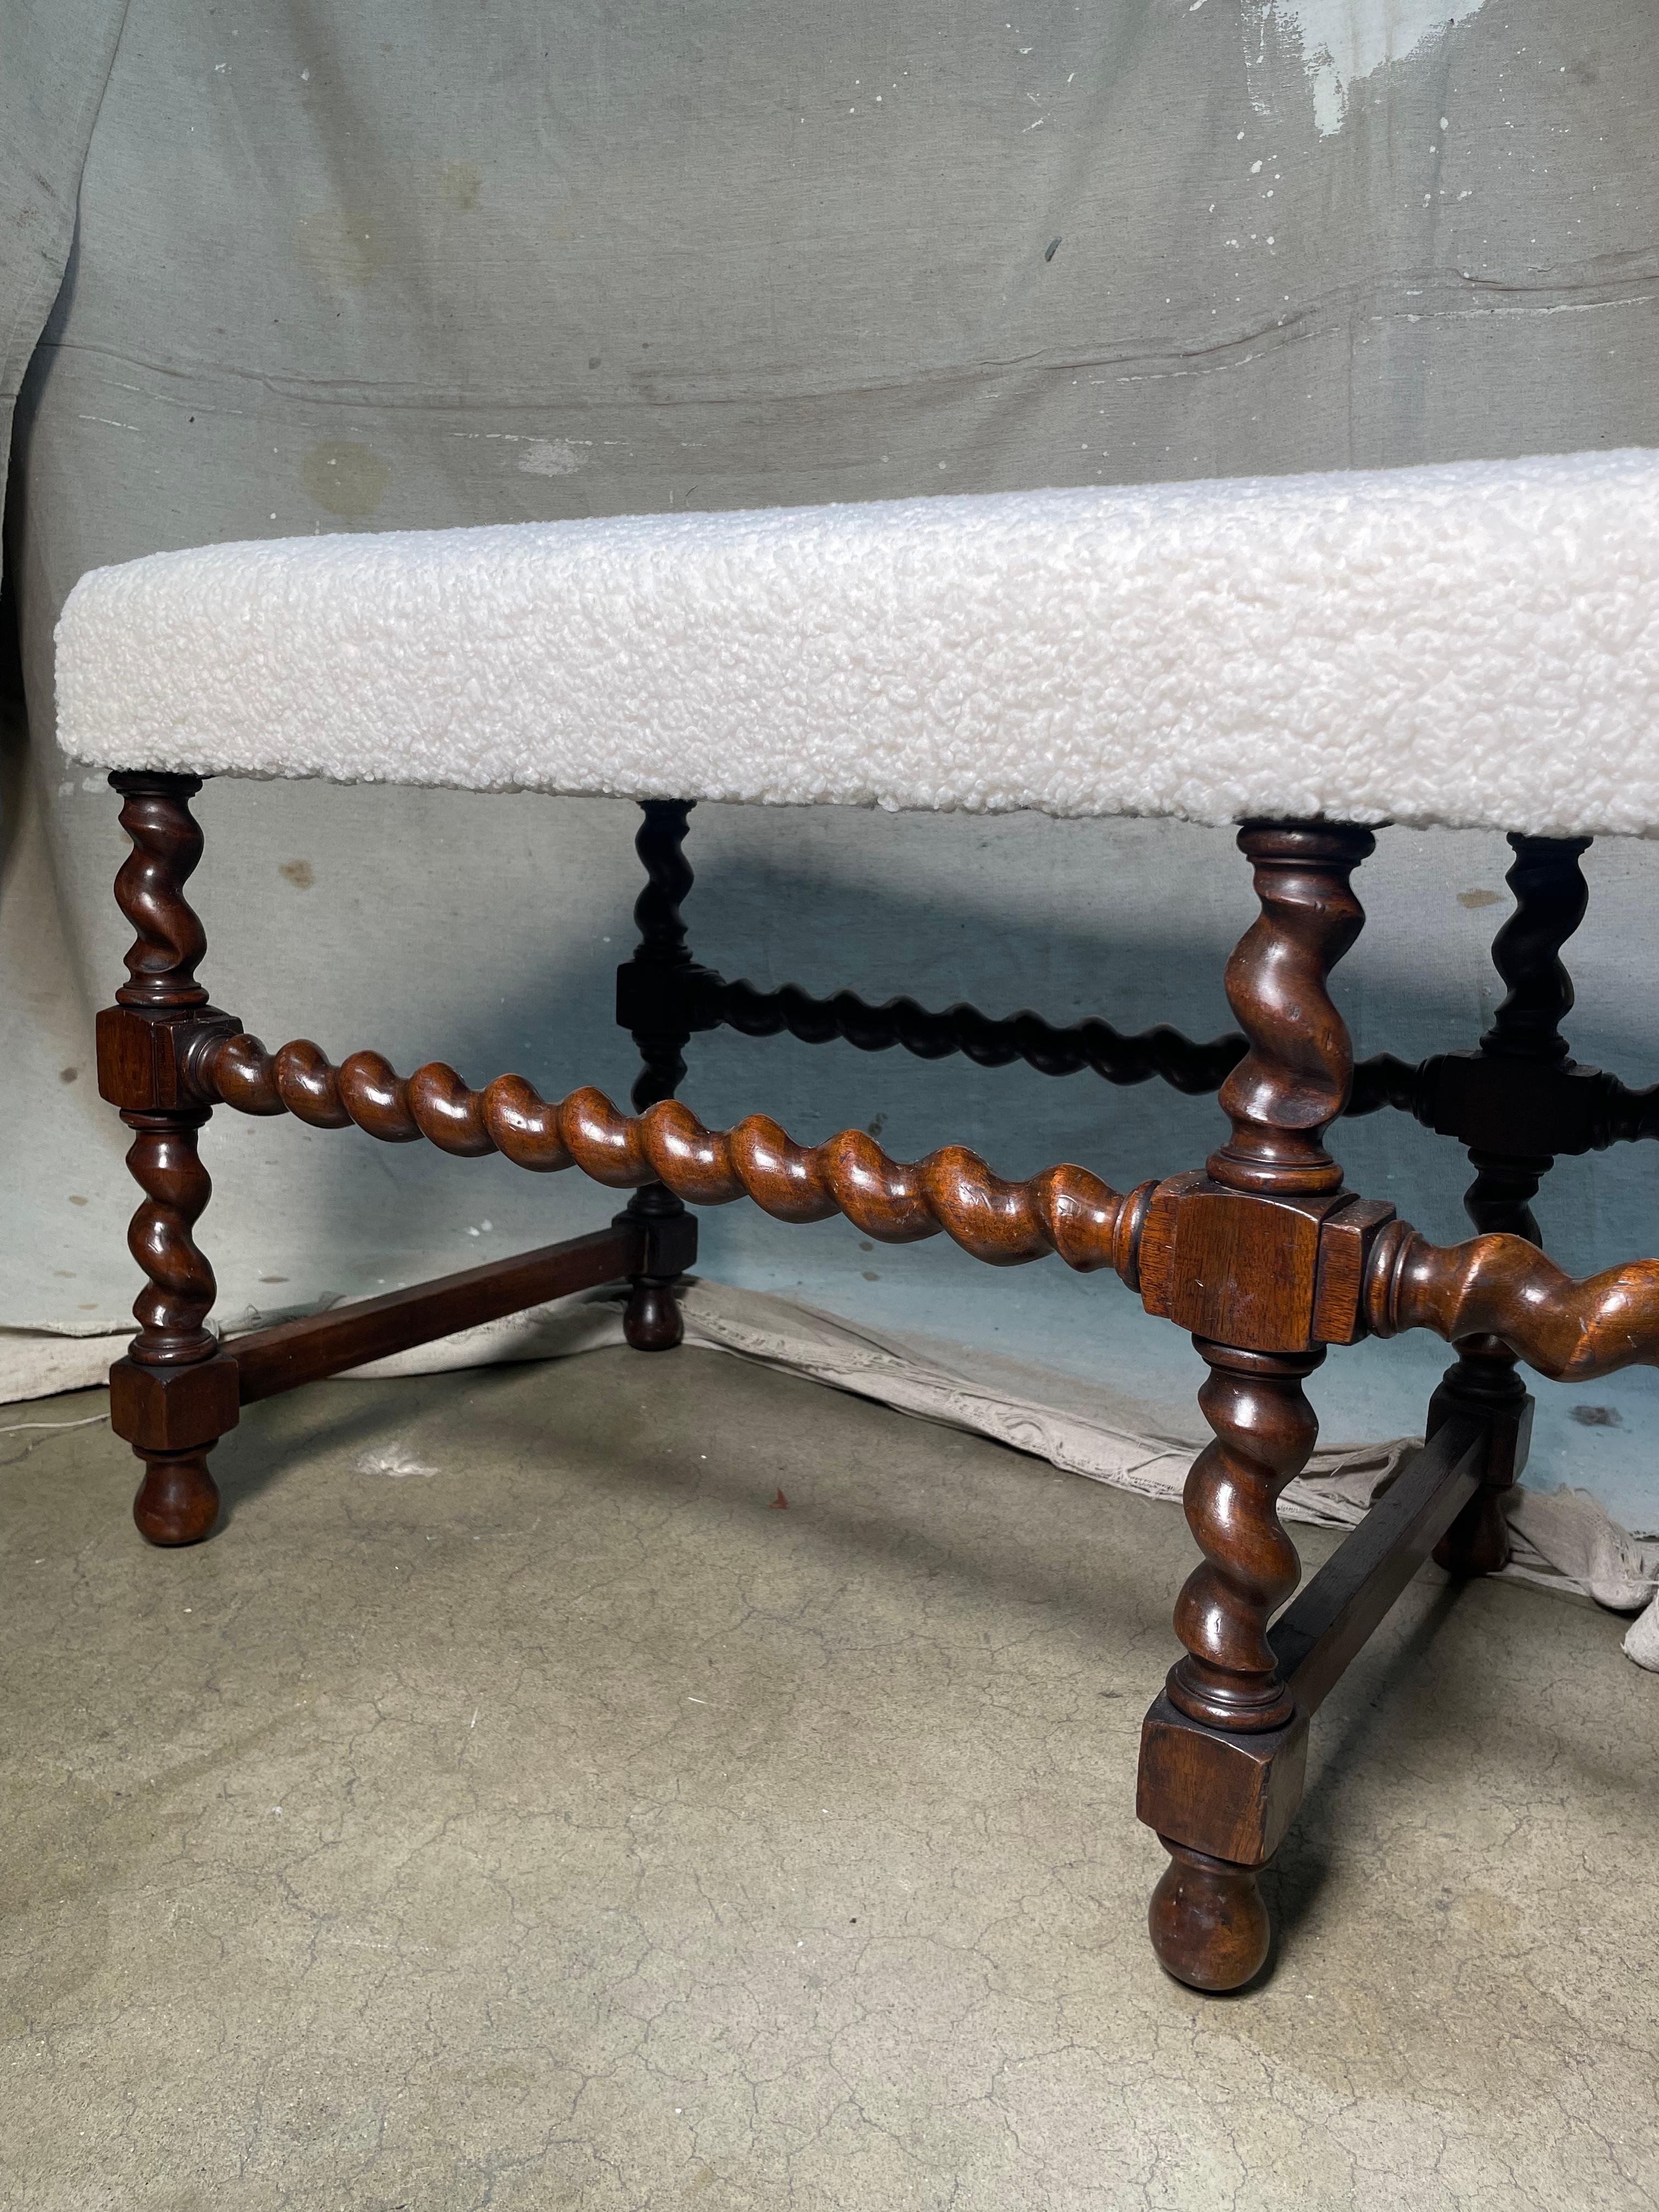 English Mid Century Modern wooden bench from the 18th century with barley twist base and white boucle upholstery. This classy, barley twist wooden bench oozes timeless elegance. This piece is characterized by its base which is not only for